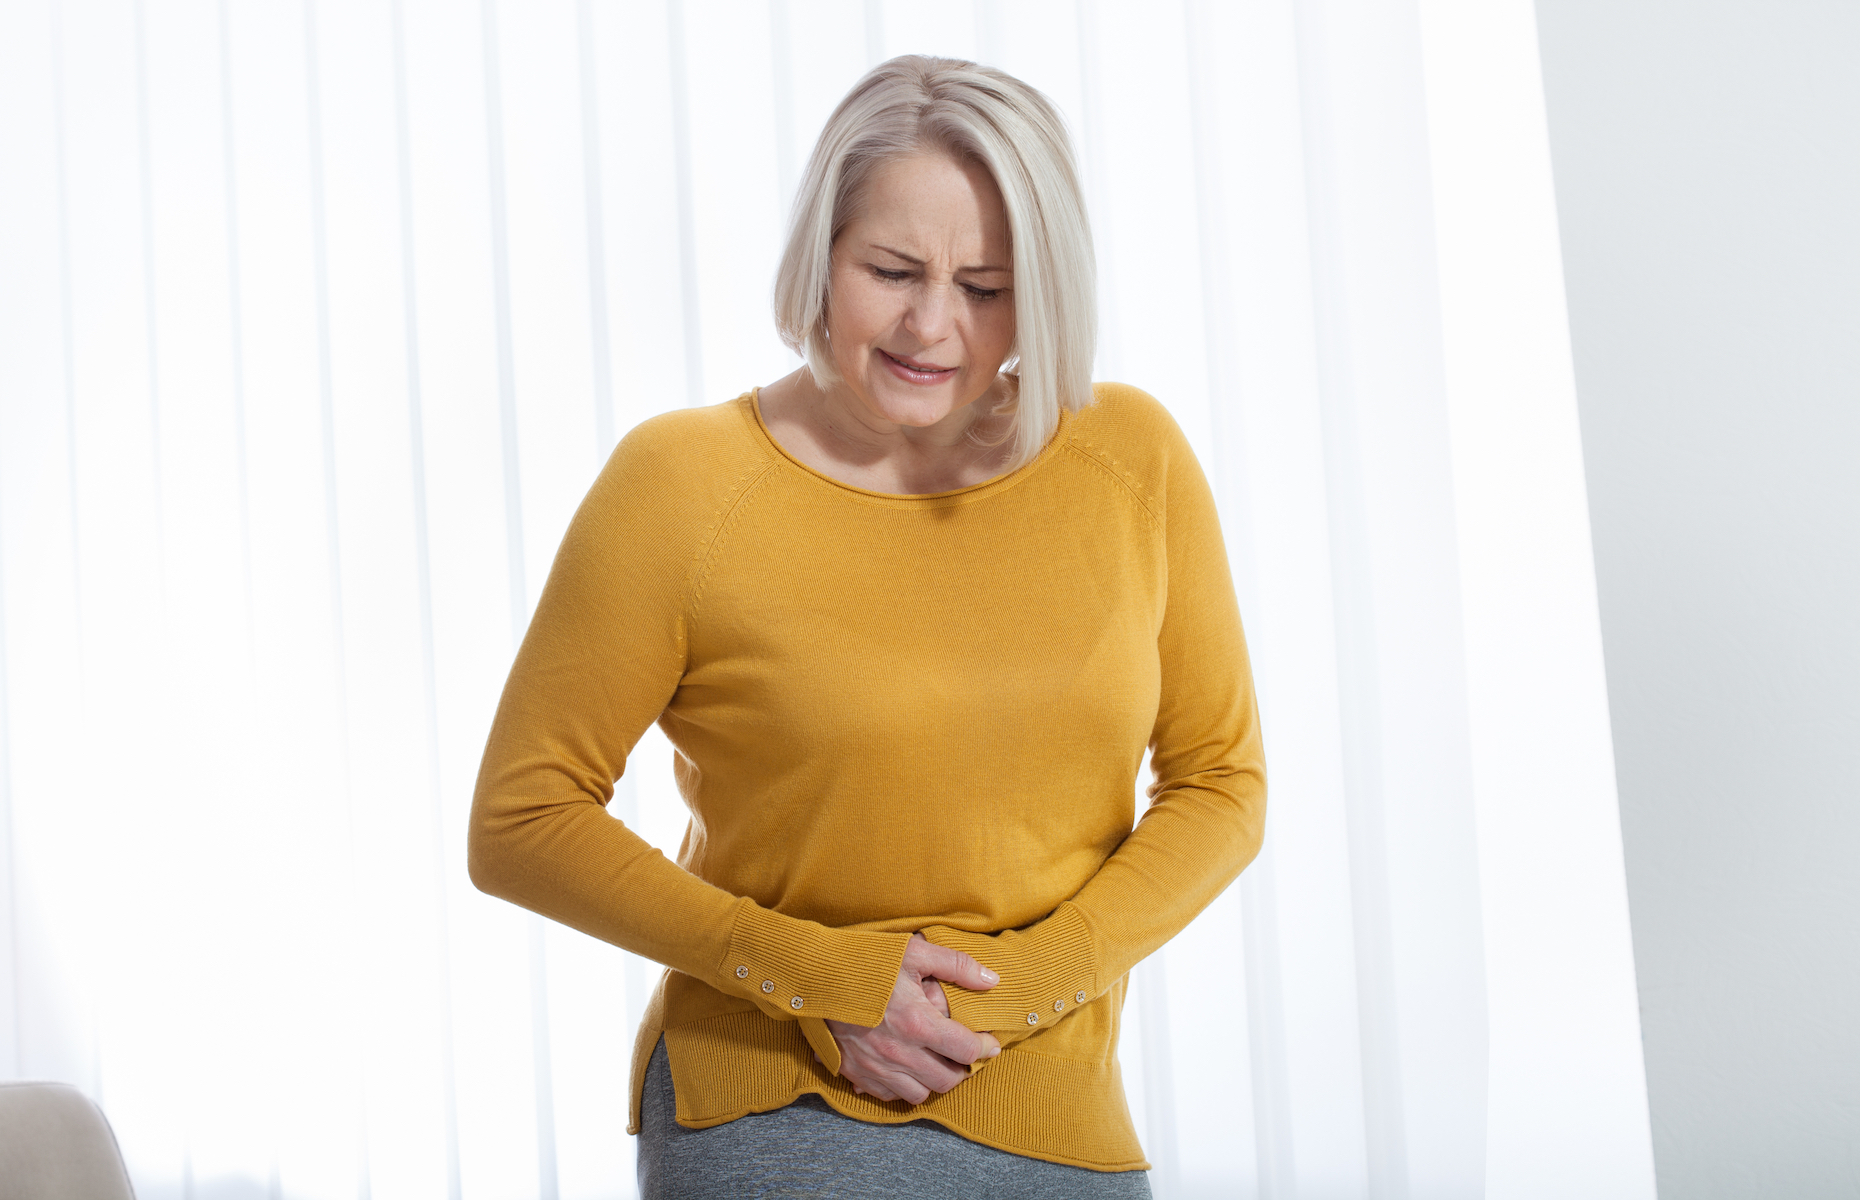 <p>Women with fibromyalgia may also experience bladder problems. Research from the official journal of the <a href="https://www.ncbi.nlm.nih.gov/pmc/articles/PMC5571646/#!po=3.84615">American Society for Pain Management Nursing</a> found that many female fibromyalgia patients also had pelvic floor symptoms. The latter can cause ongoing problems, such as incontinence. If you are struggling with this issue, speak to your doctor.</p>